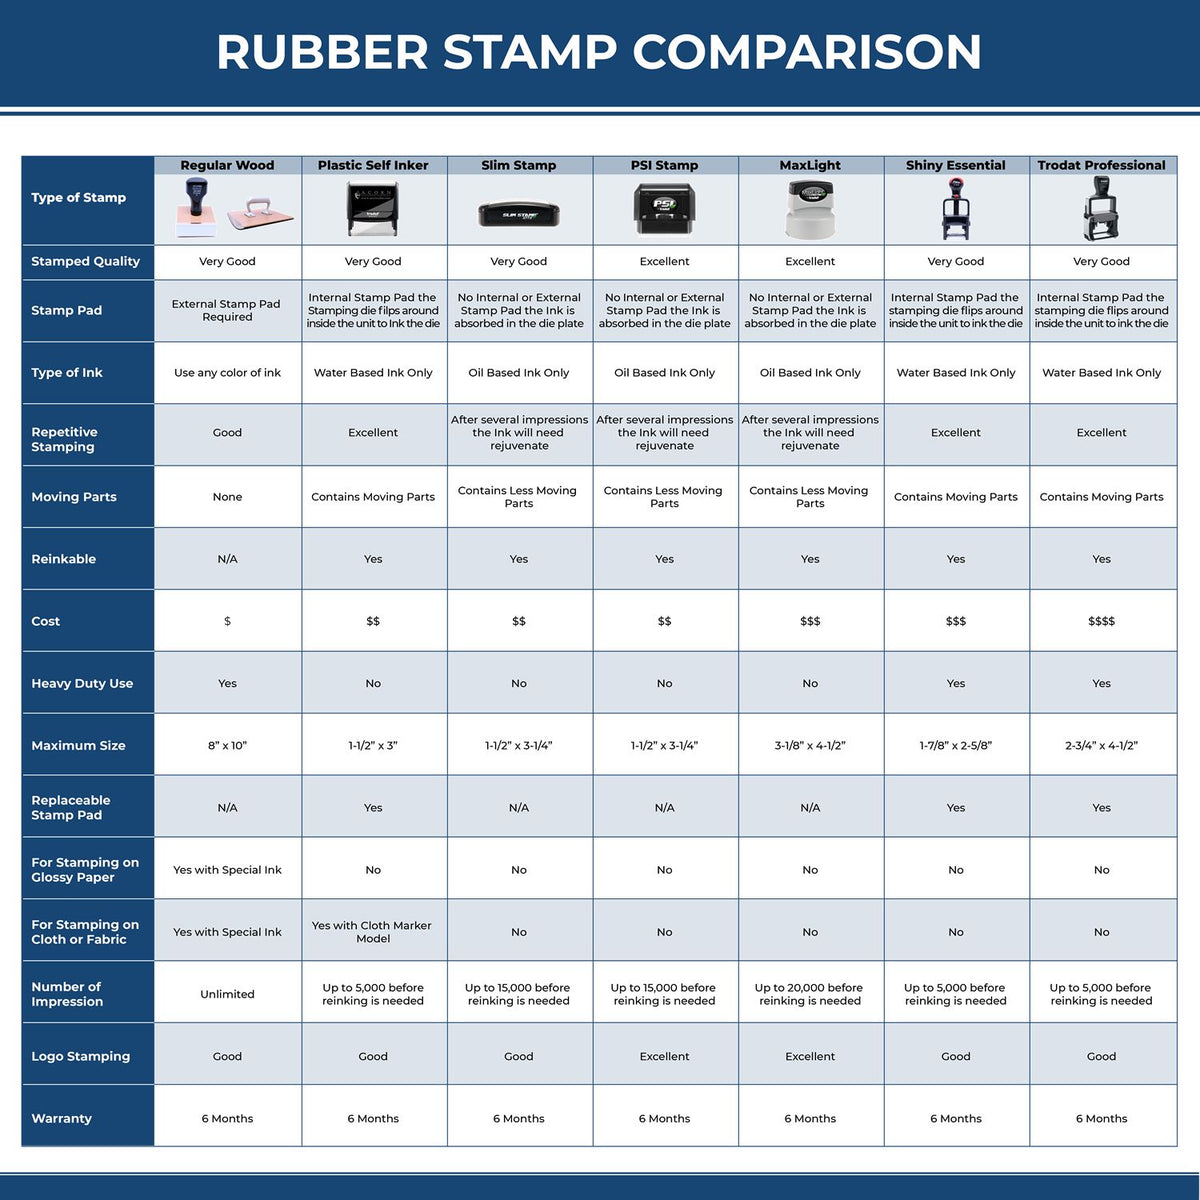 Large Self-Inking Aviso Stamp 5534S Rubber Stamp Comparison